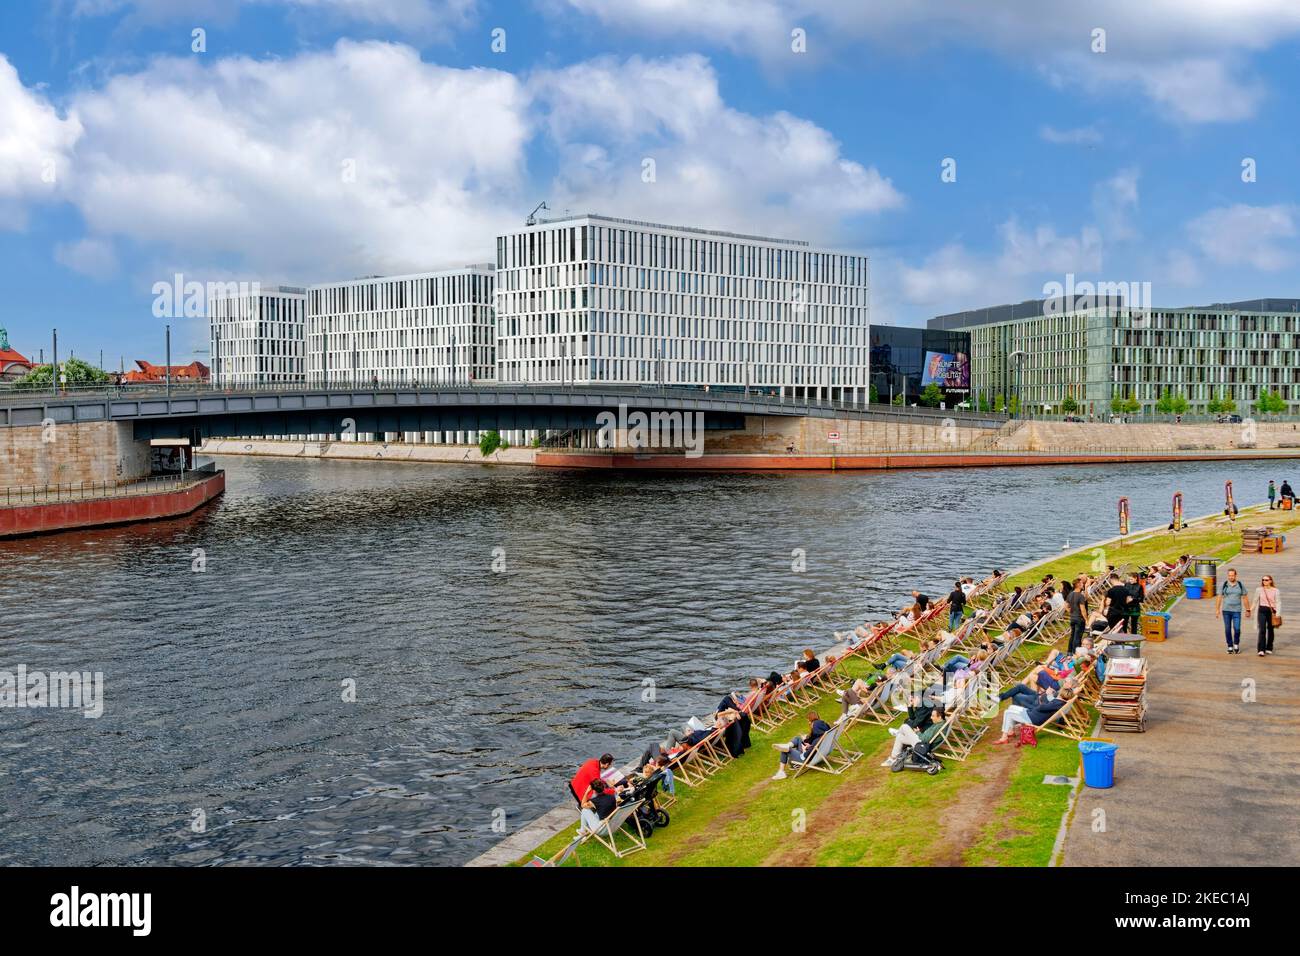 on the bank cafe in summer next to river Spree in Mitte Berlin, Germany, Europe Stock Photo